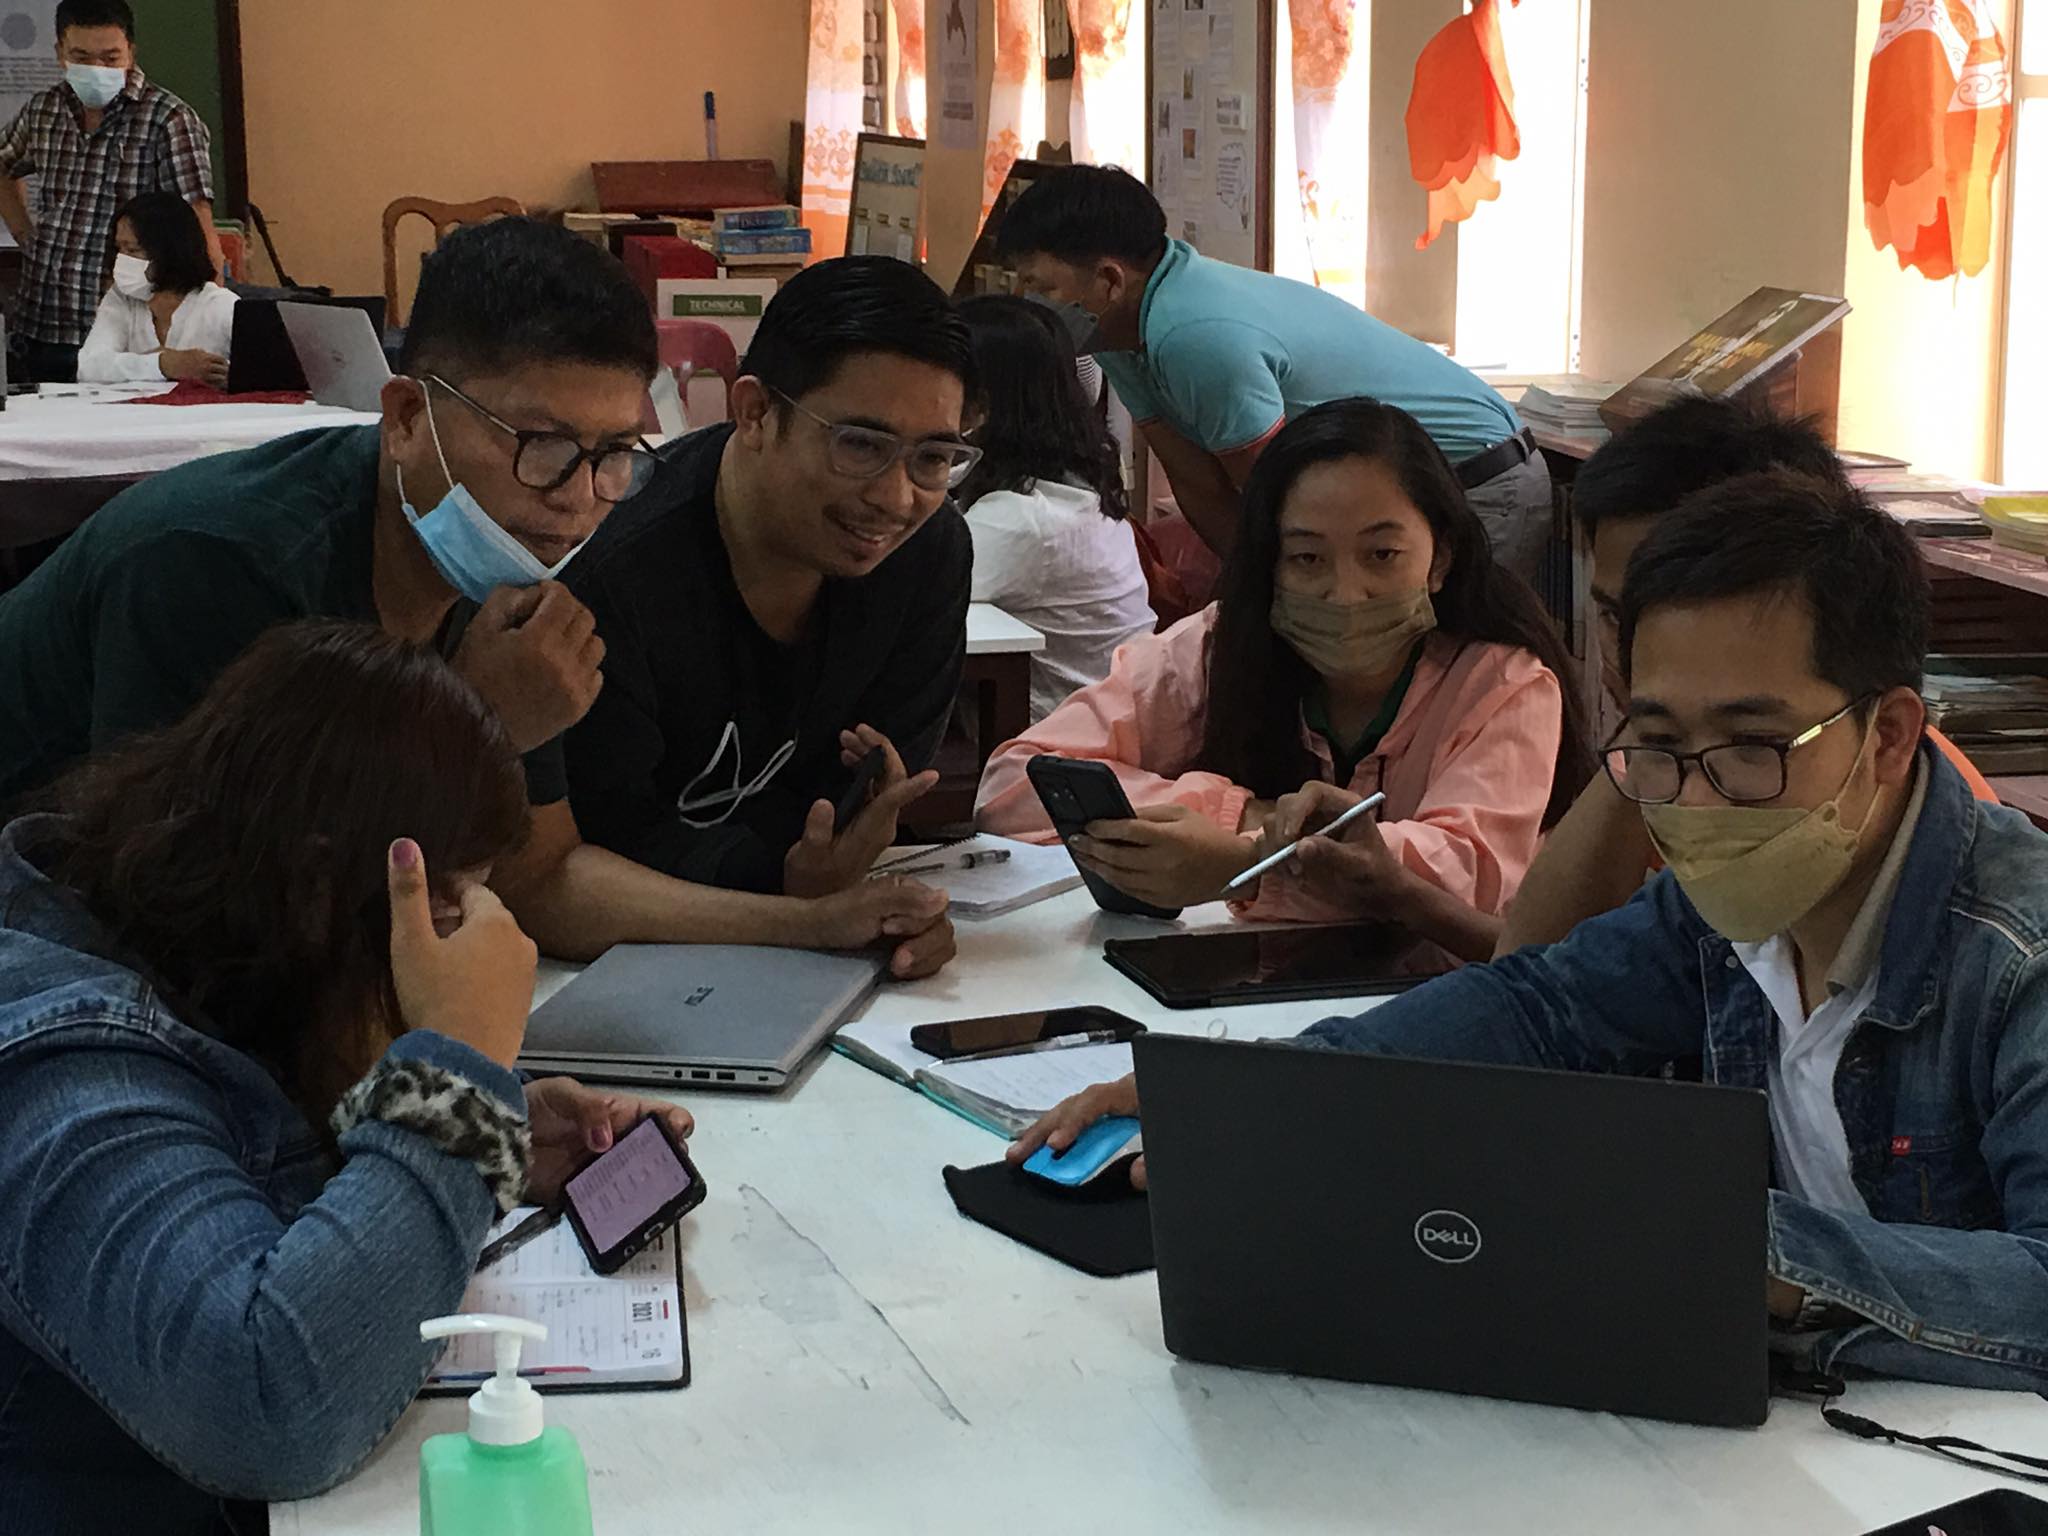 DepEd Batanes pushes through virtual, face-to-face journ training after months of postponement